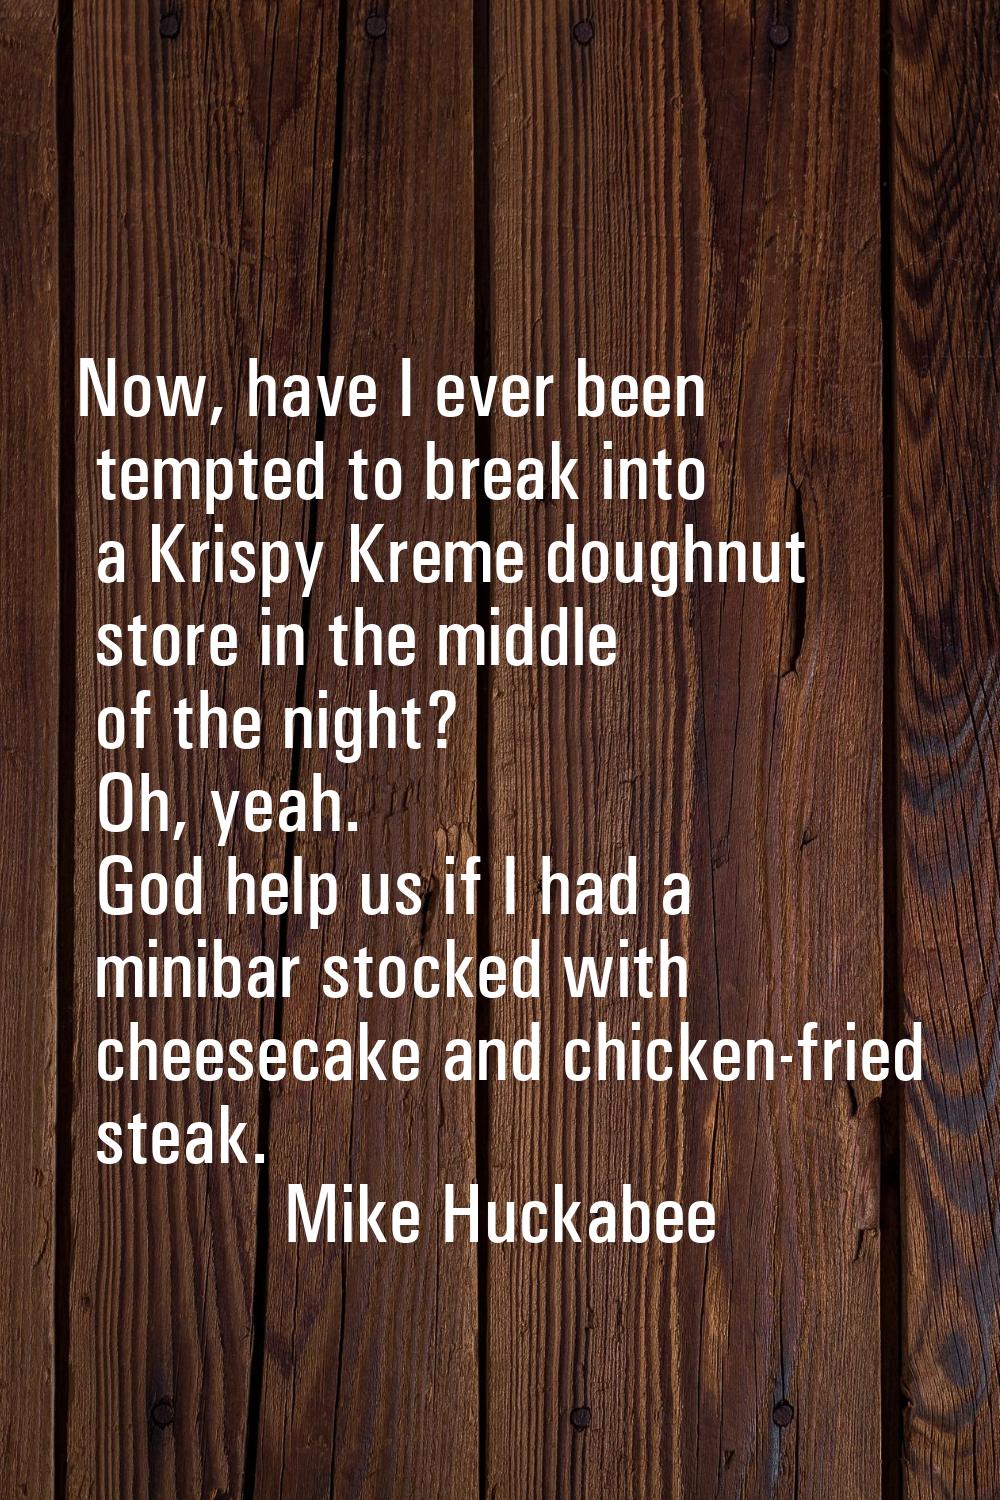 Now, have I ever been tempted to break into a Krispy Kreme doughnut store in the middle of the nigh